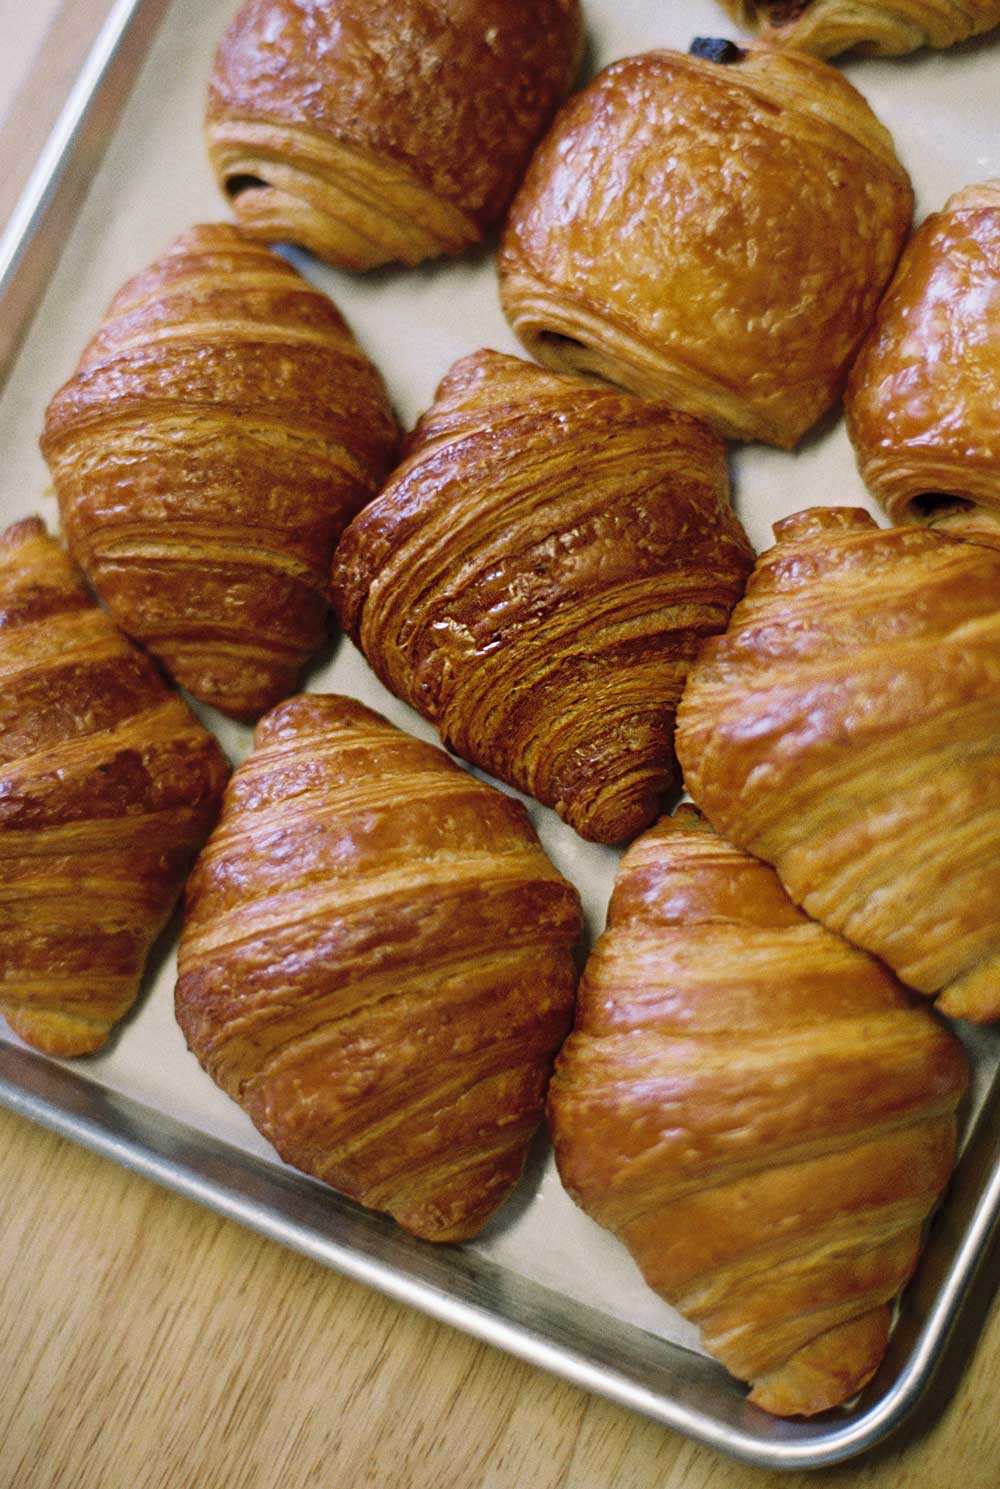 An artful image of croissants